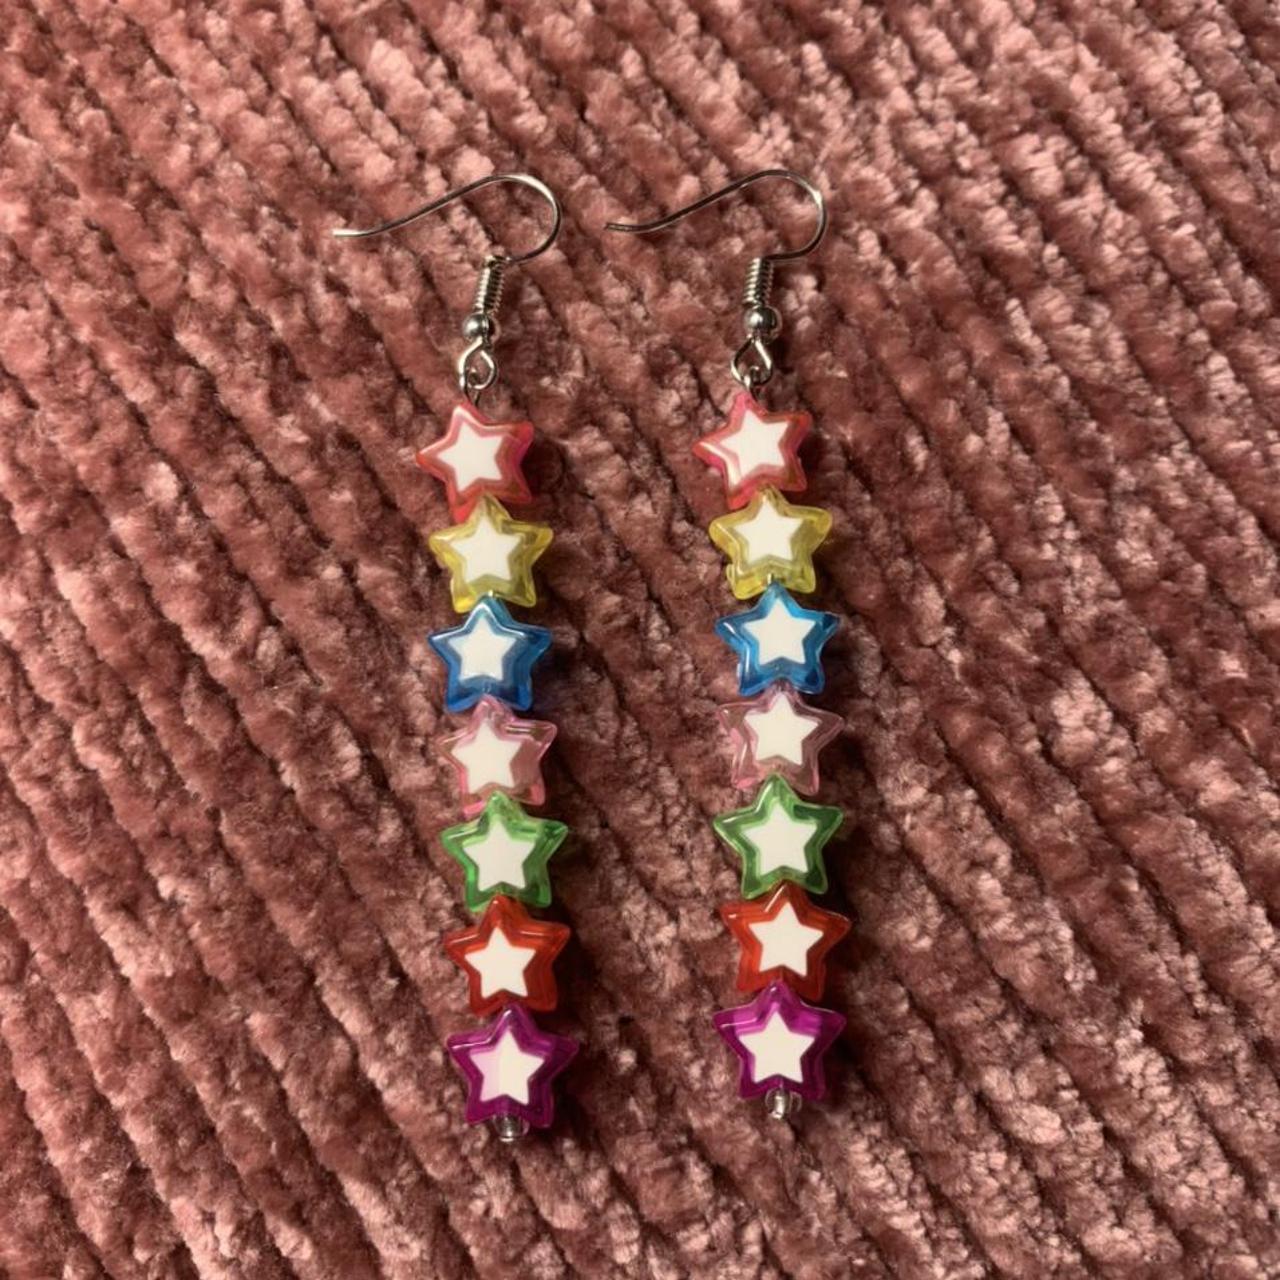 Product Image 1 - Multicolored star earrings! 🦋

These earrings